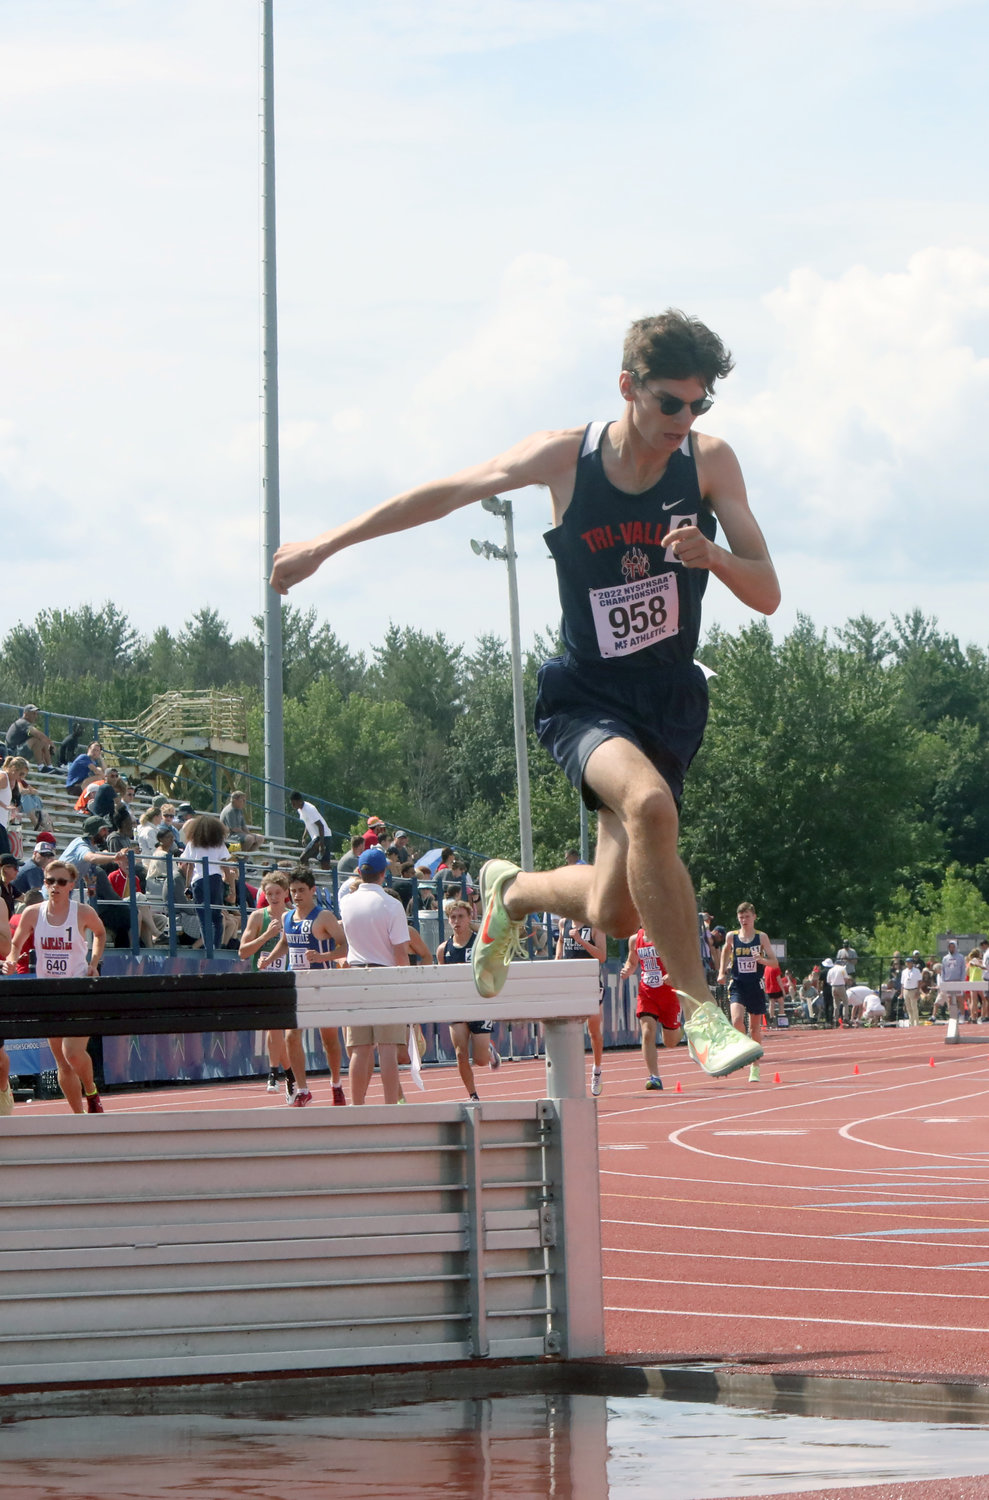 Tri-Valley’s Caleb Edwards took sixth among the D2 contenders in the 3000 steeplechase. He also ran a leg in the T-V’s tenth place D2 finish in the 4x800 relay along with Adam Furman, Van Furman and Craig Costa.